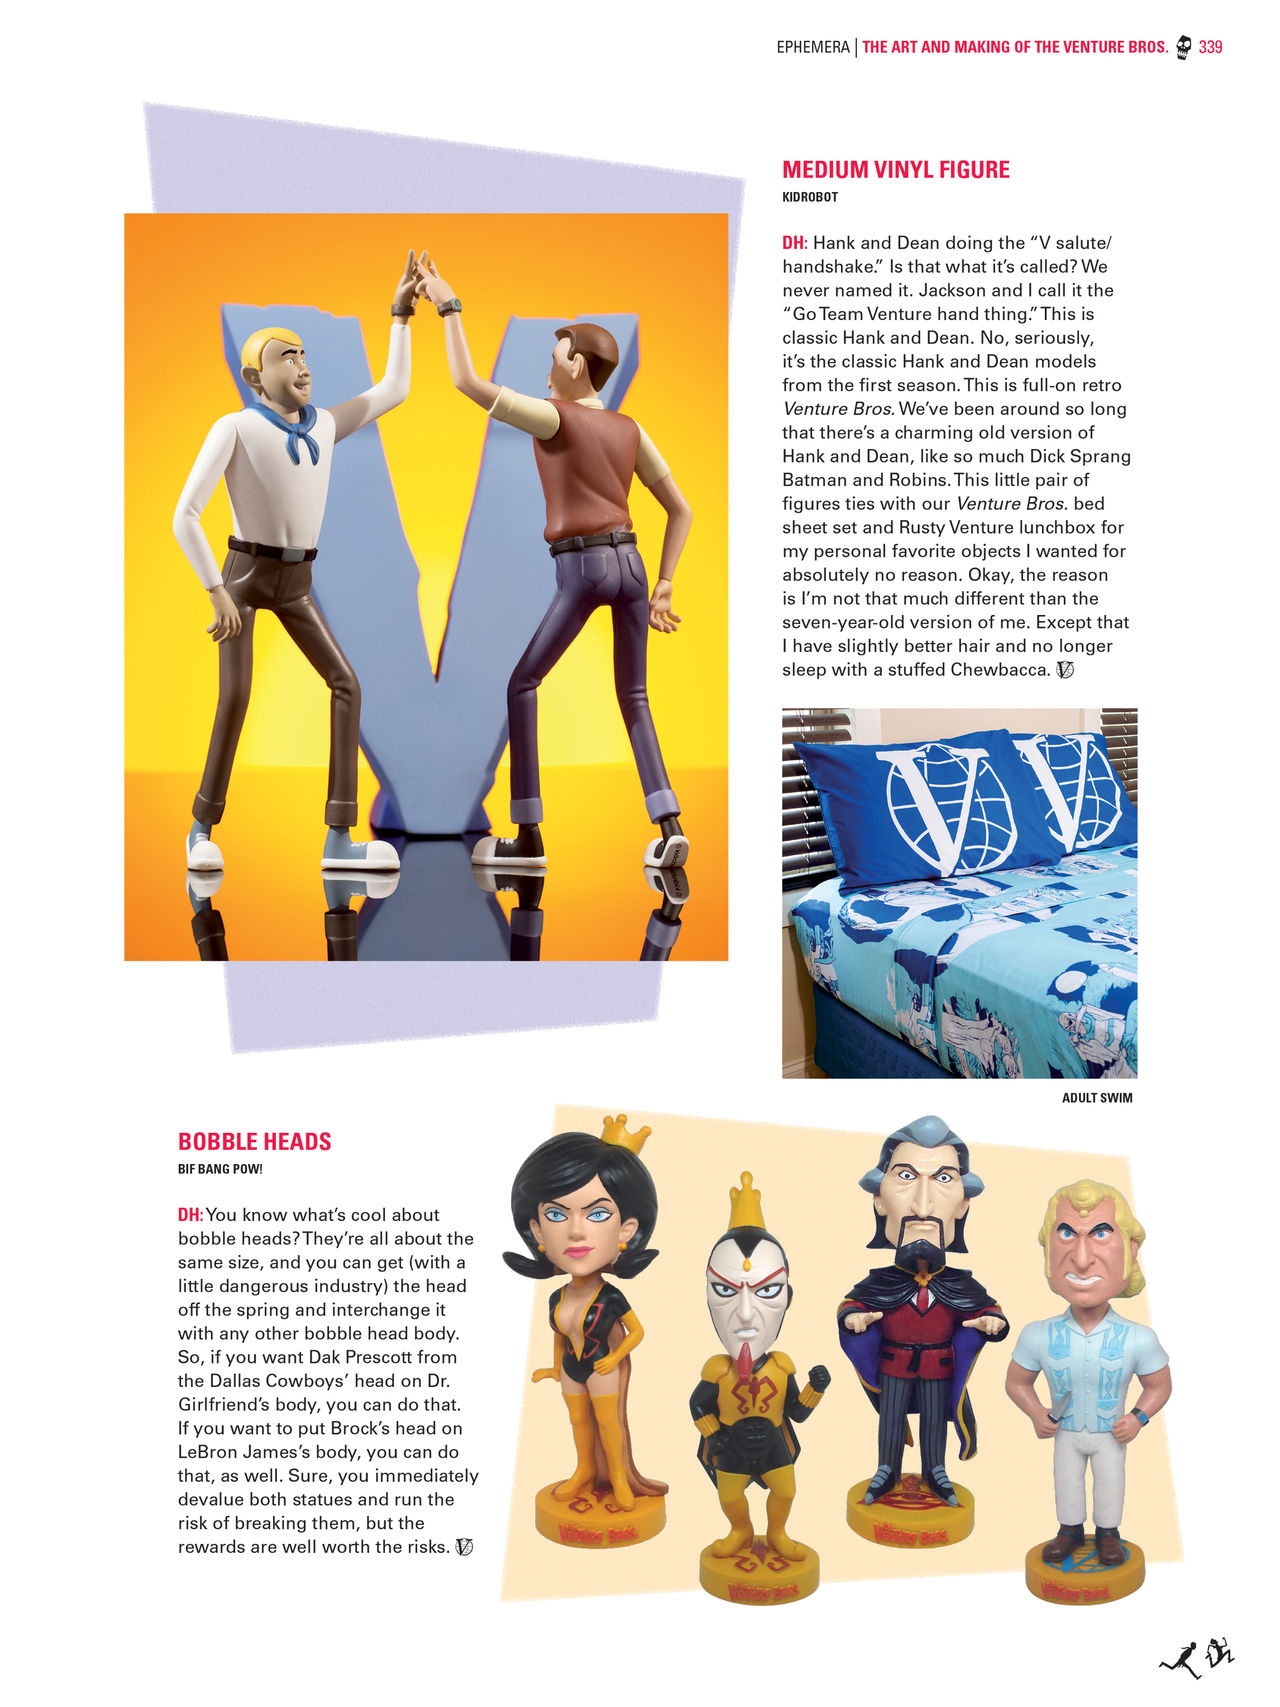 Go Team Venture! - The Art and Making of the Venture Bros 337